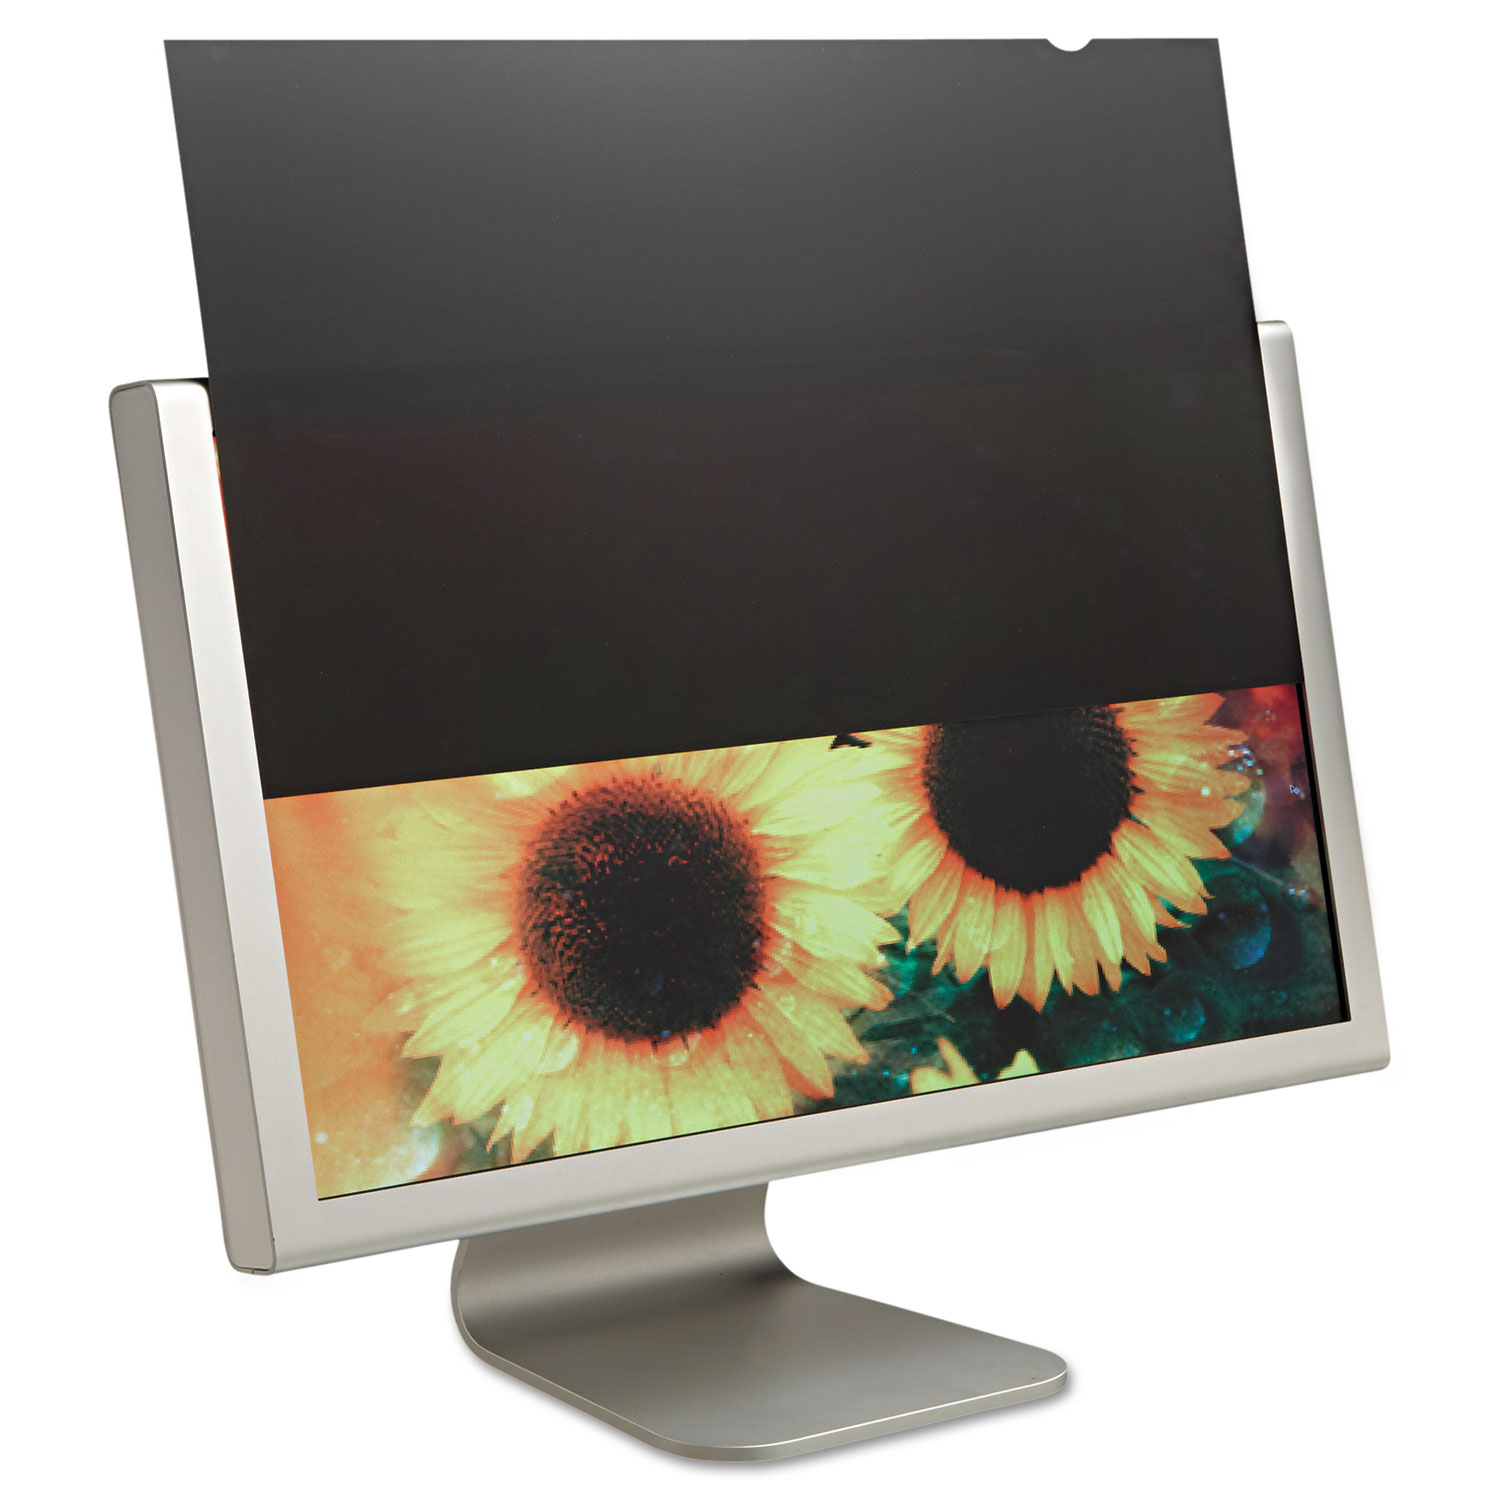 Secure View LCD Privacy Filter For 24" Widescreen 16.9 Aspect Ratio - image 4 of 8